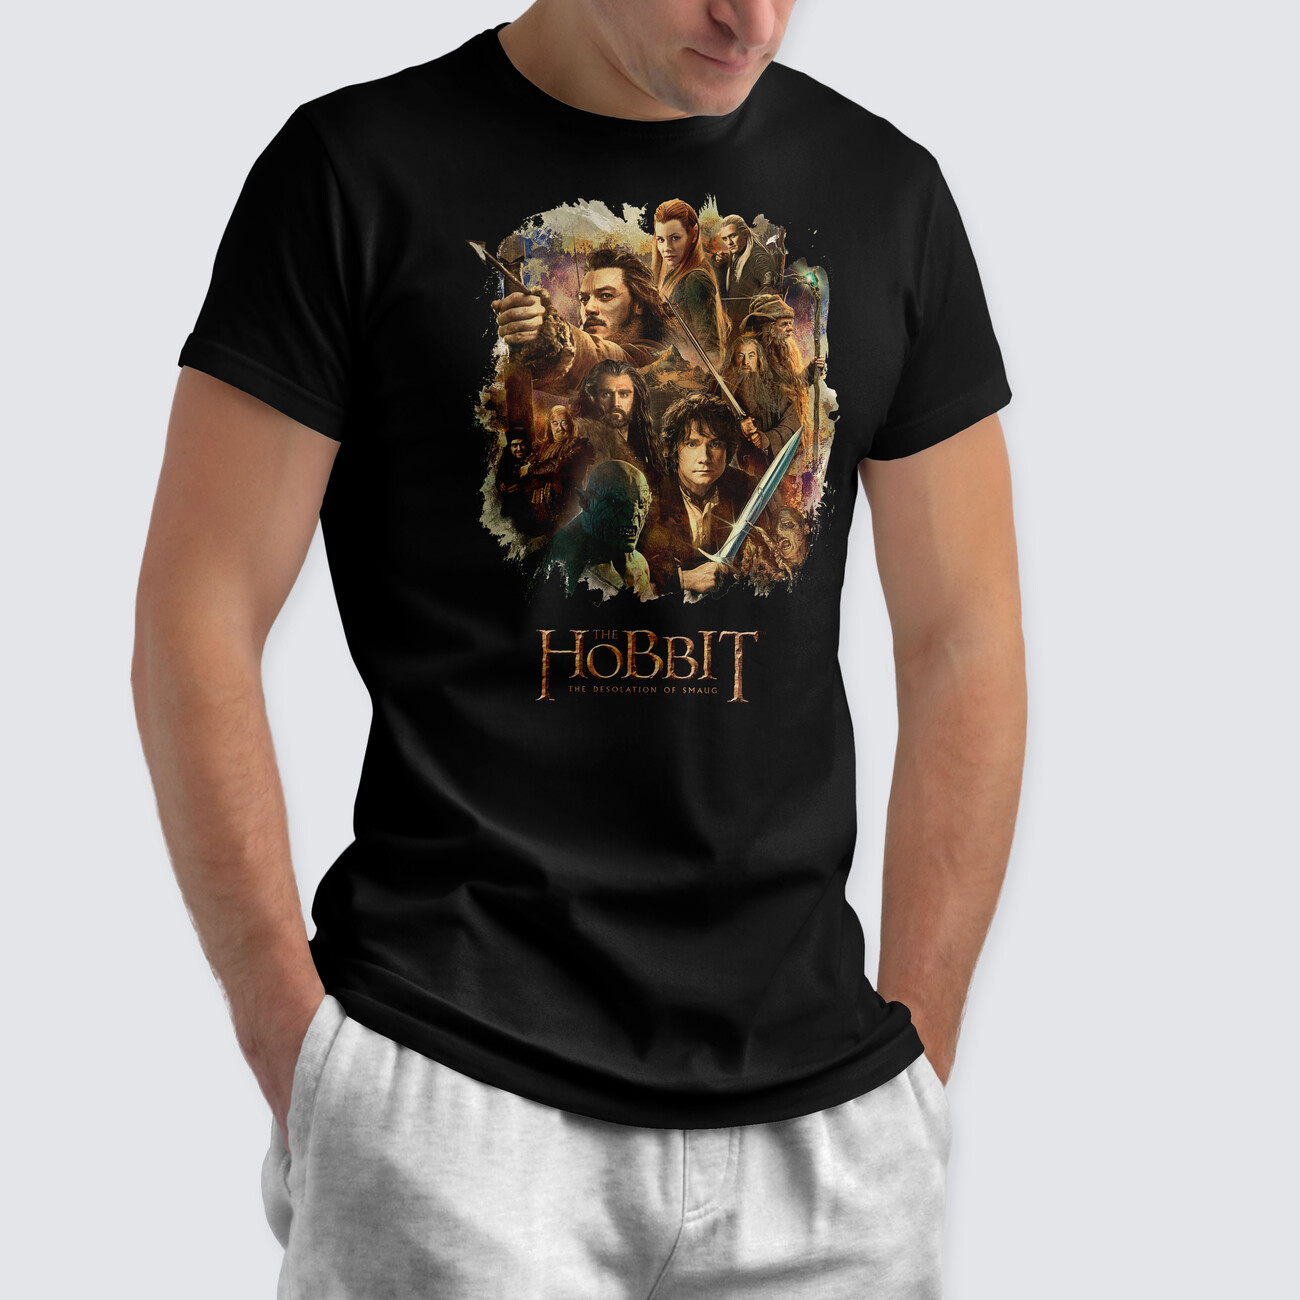 Desolation of for Hobbit: - merchandise and Smaug accessories Clothes Characters fans | The